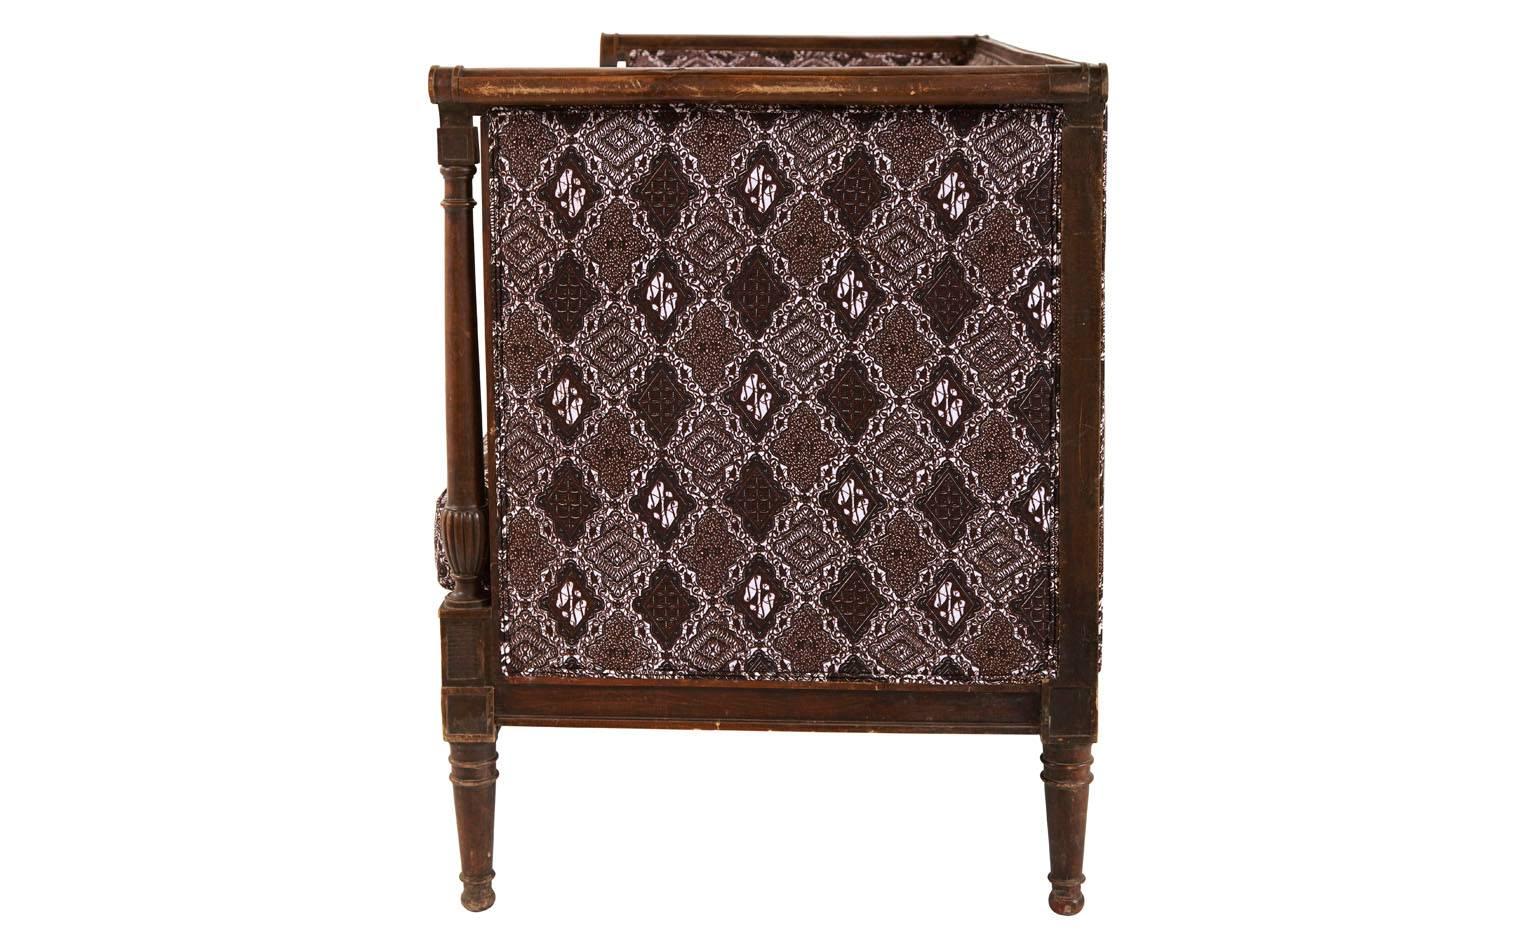 Reupholstered in cotton batiks,
early 20th century,
France.

Dimensions:
72.75